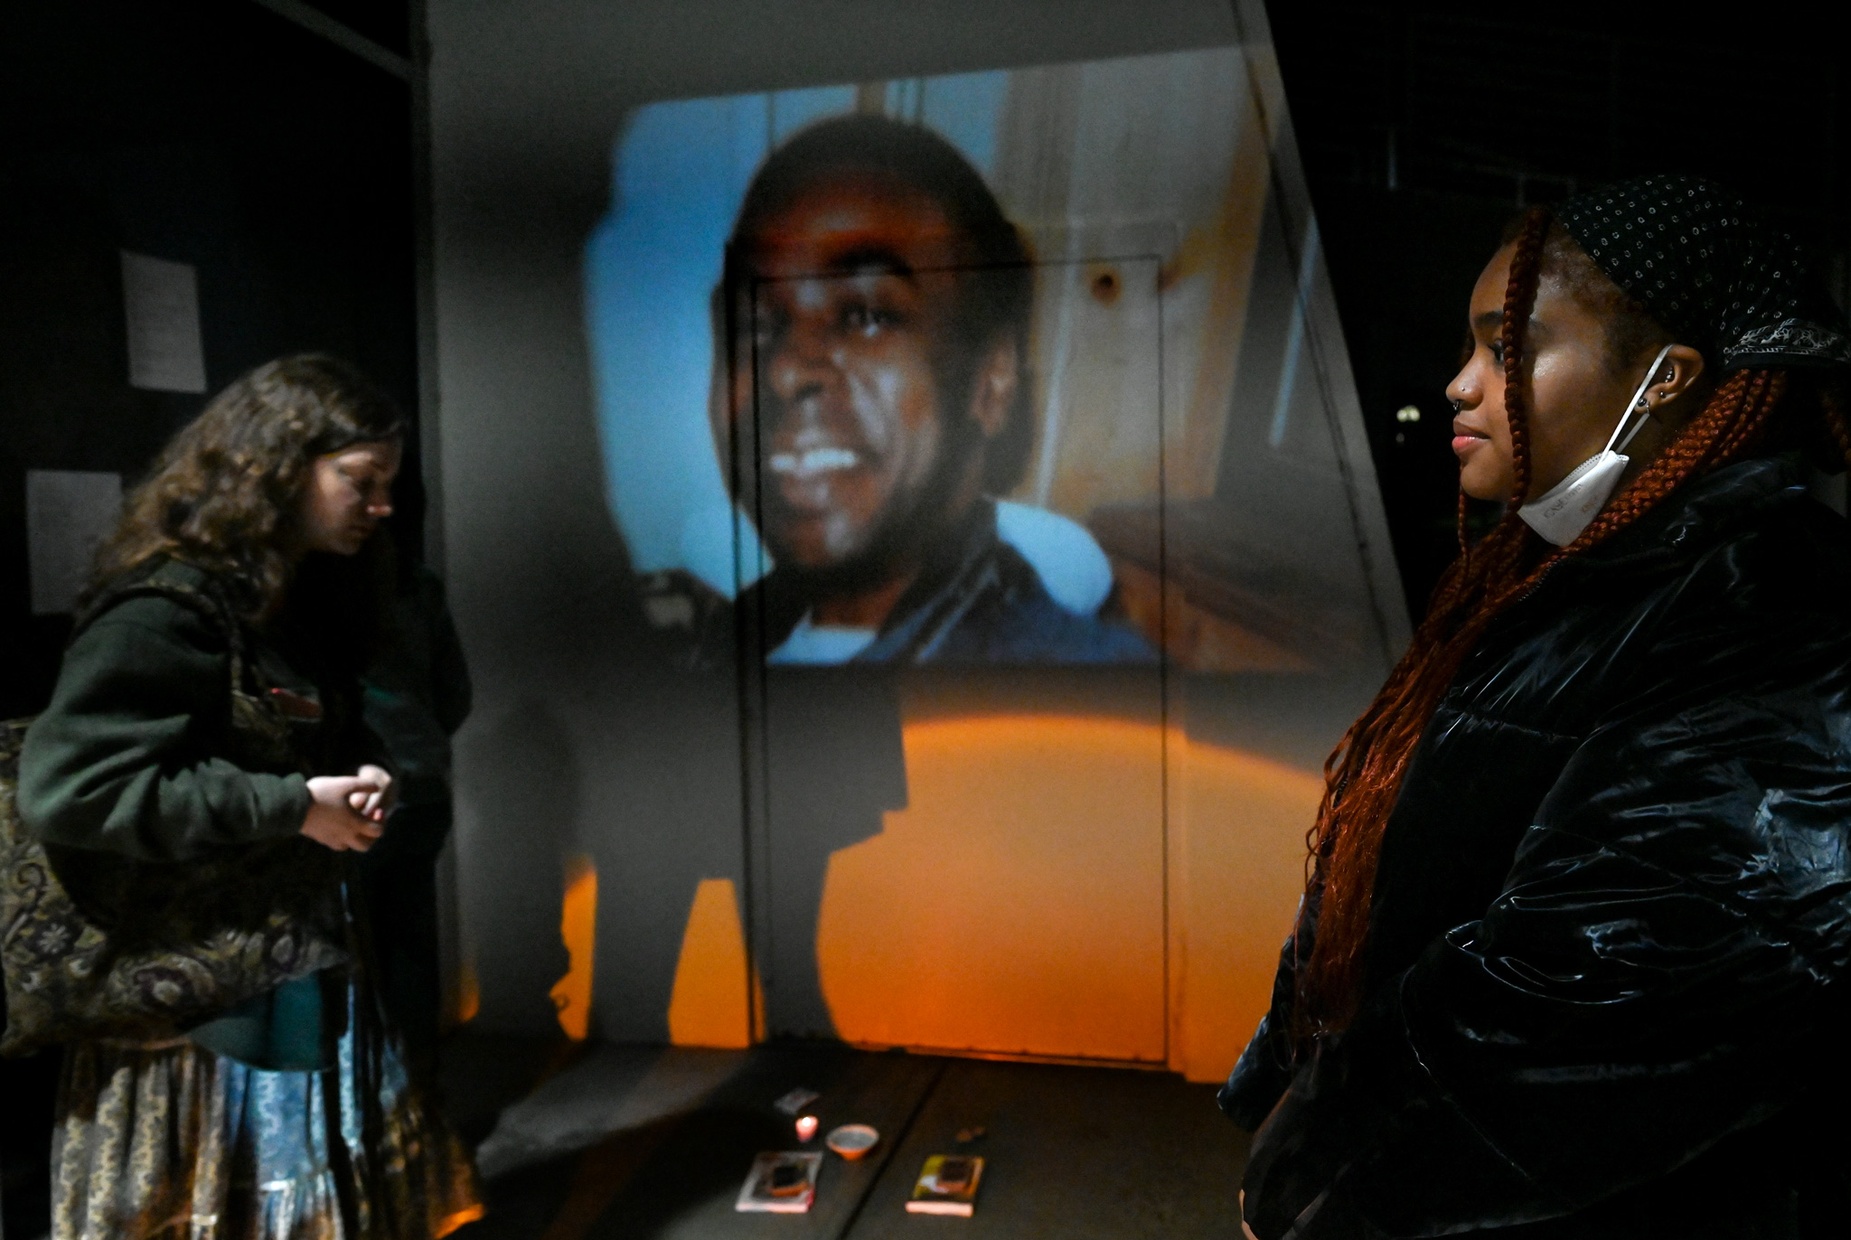 Two people stand in front of a photo of a man projected onto the side of a building.